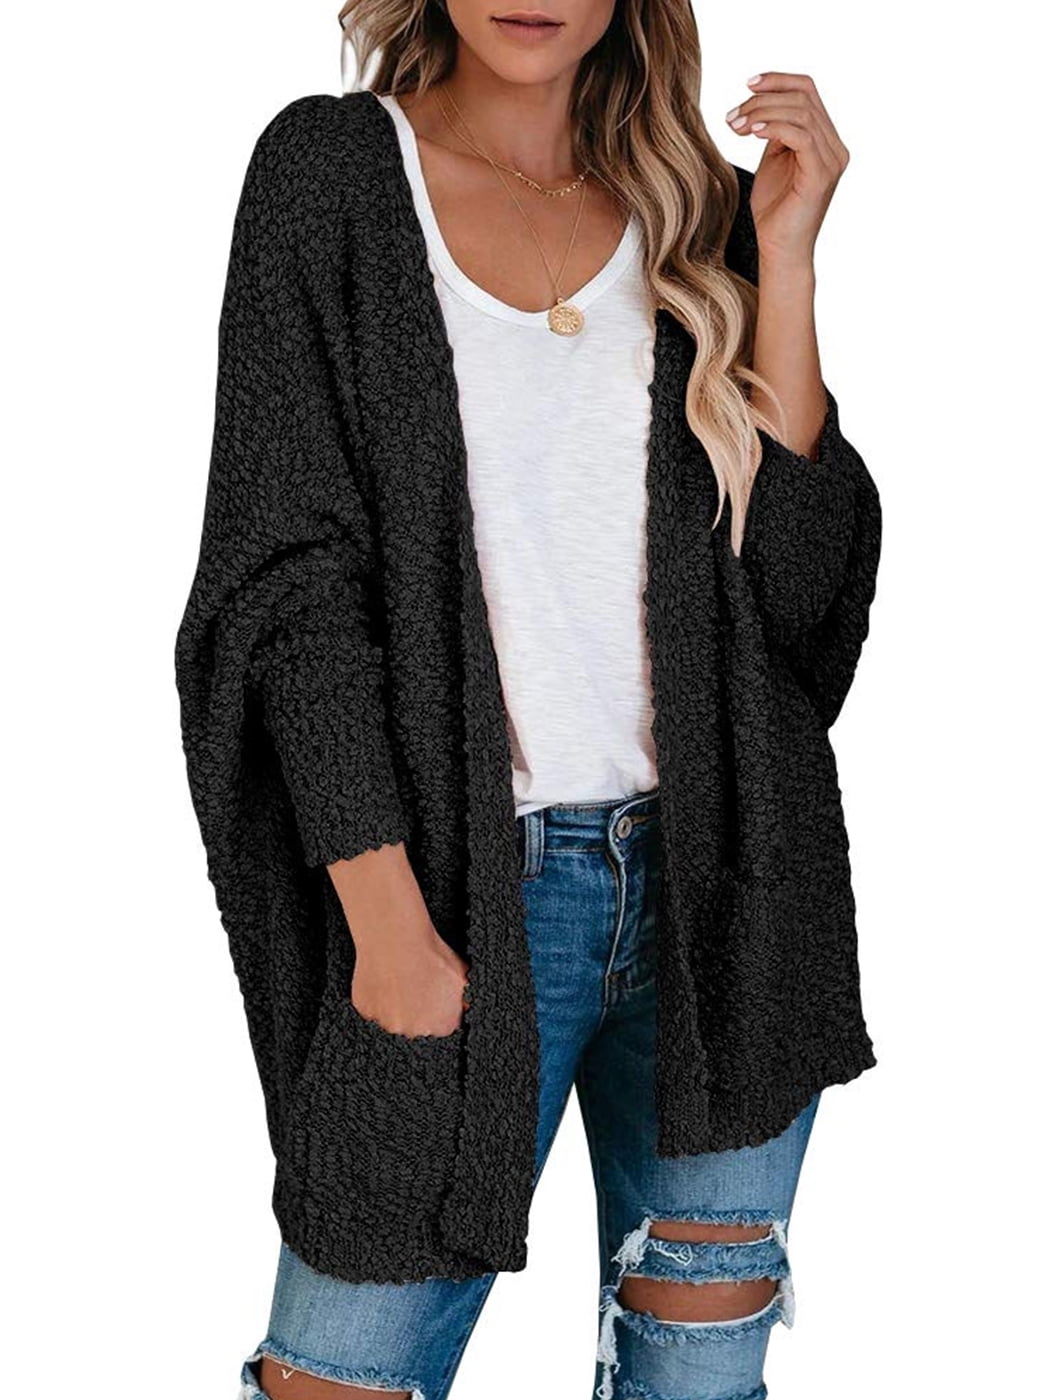 OUGES Women's Long Batwing Sleeve Open Front Chunky Knitted Cardigan Sweater Coat with Pockets 